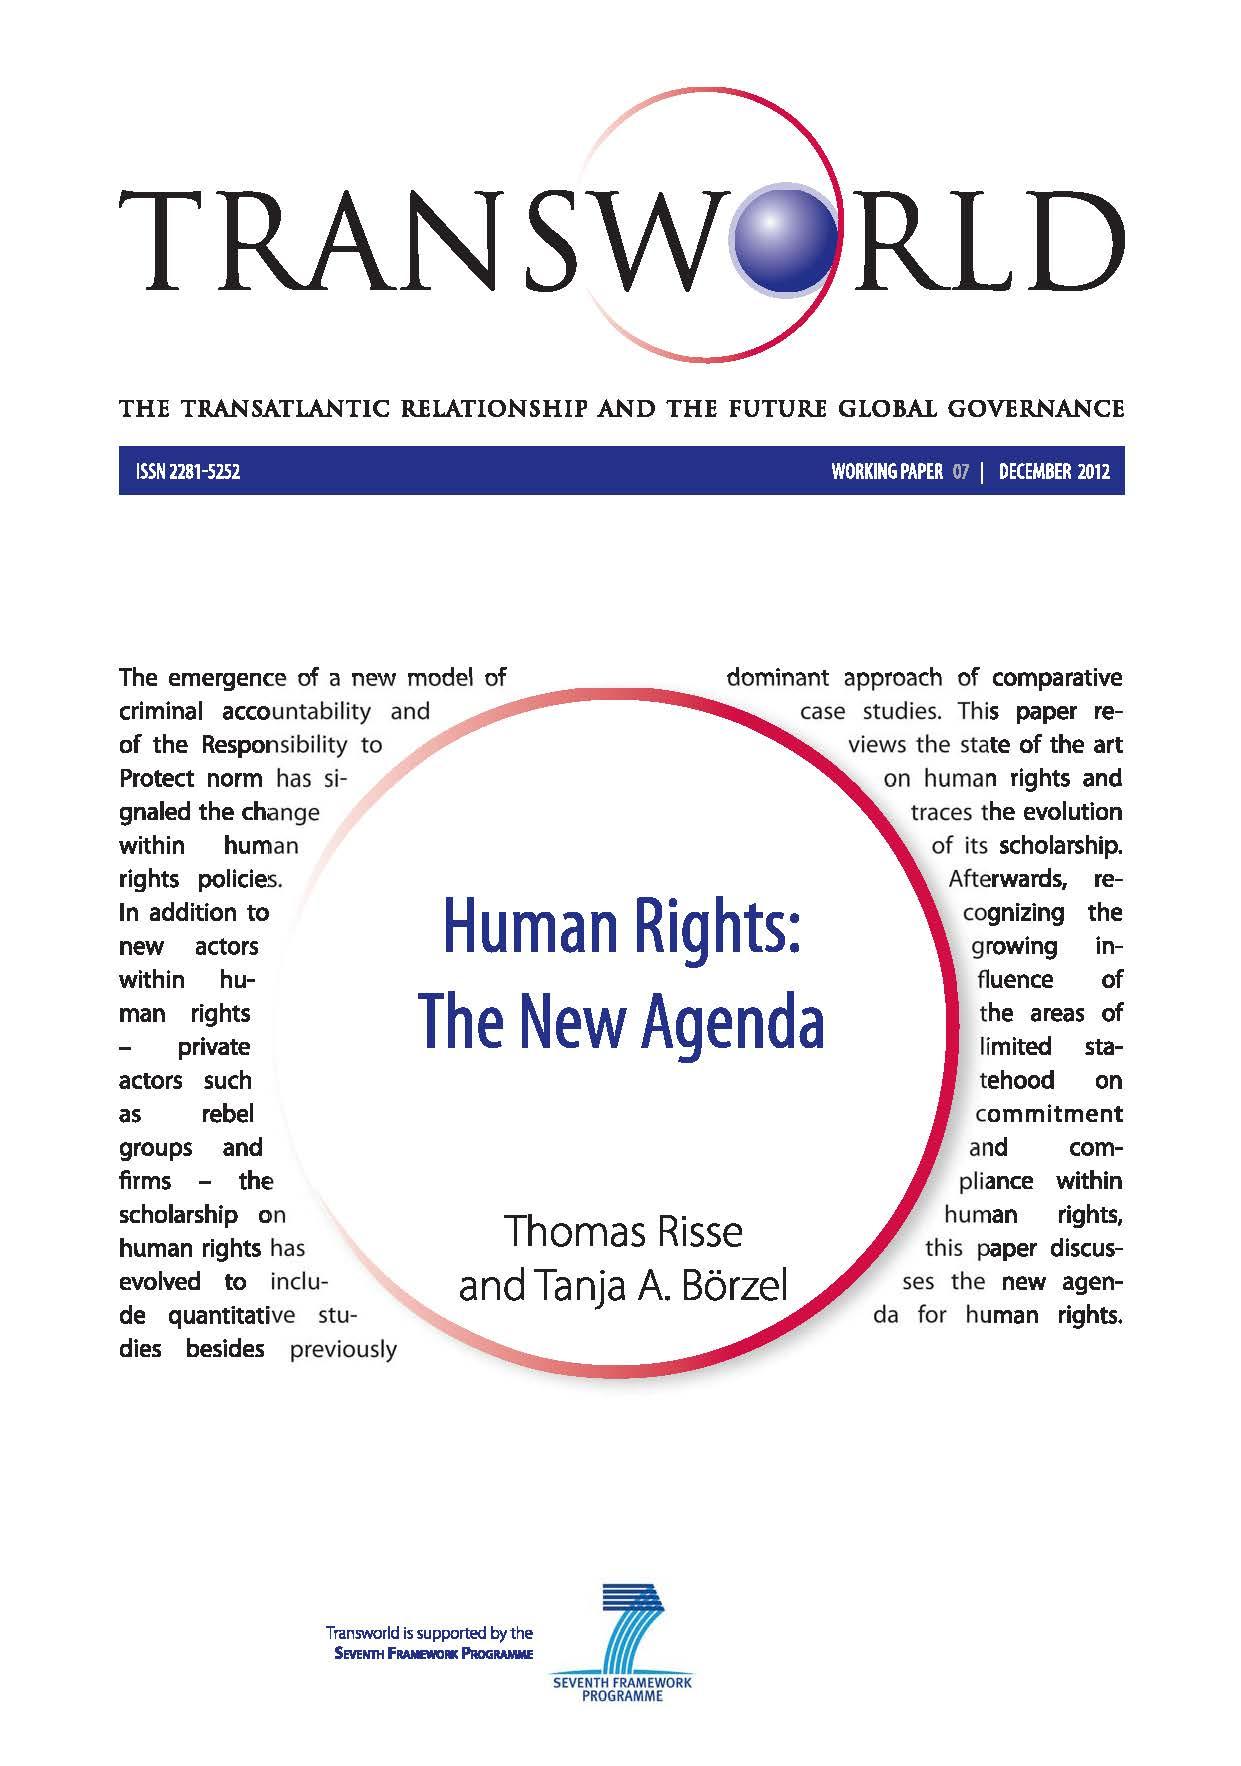 evolution of the concept of human rights